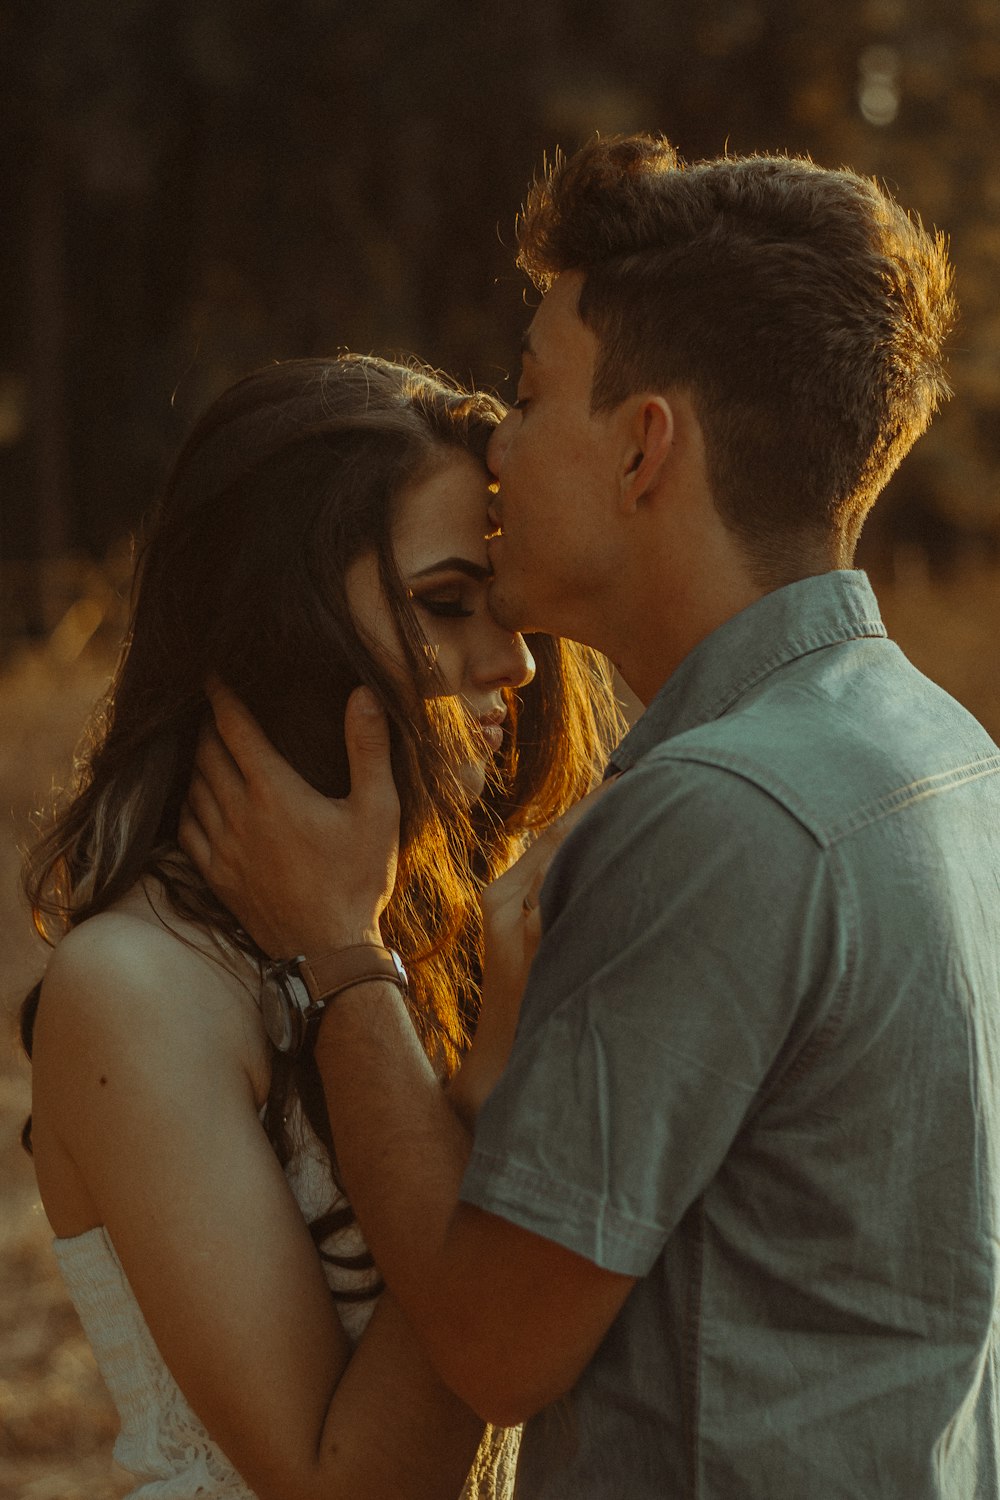 500+ Boyfriend And Girlfriend Pictures | Download Free Images on ...